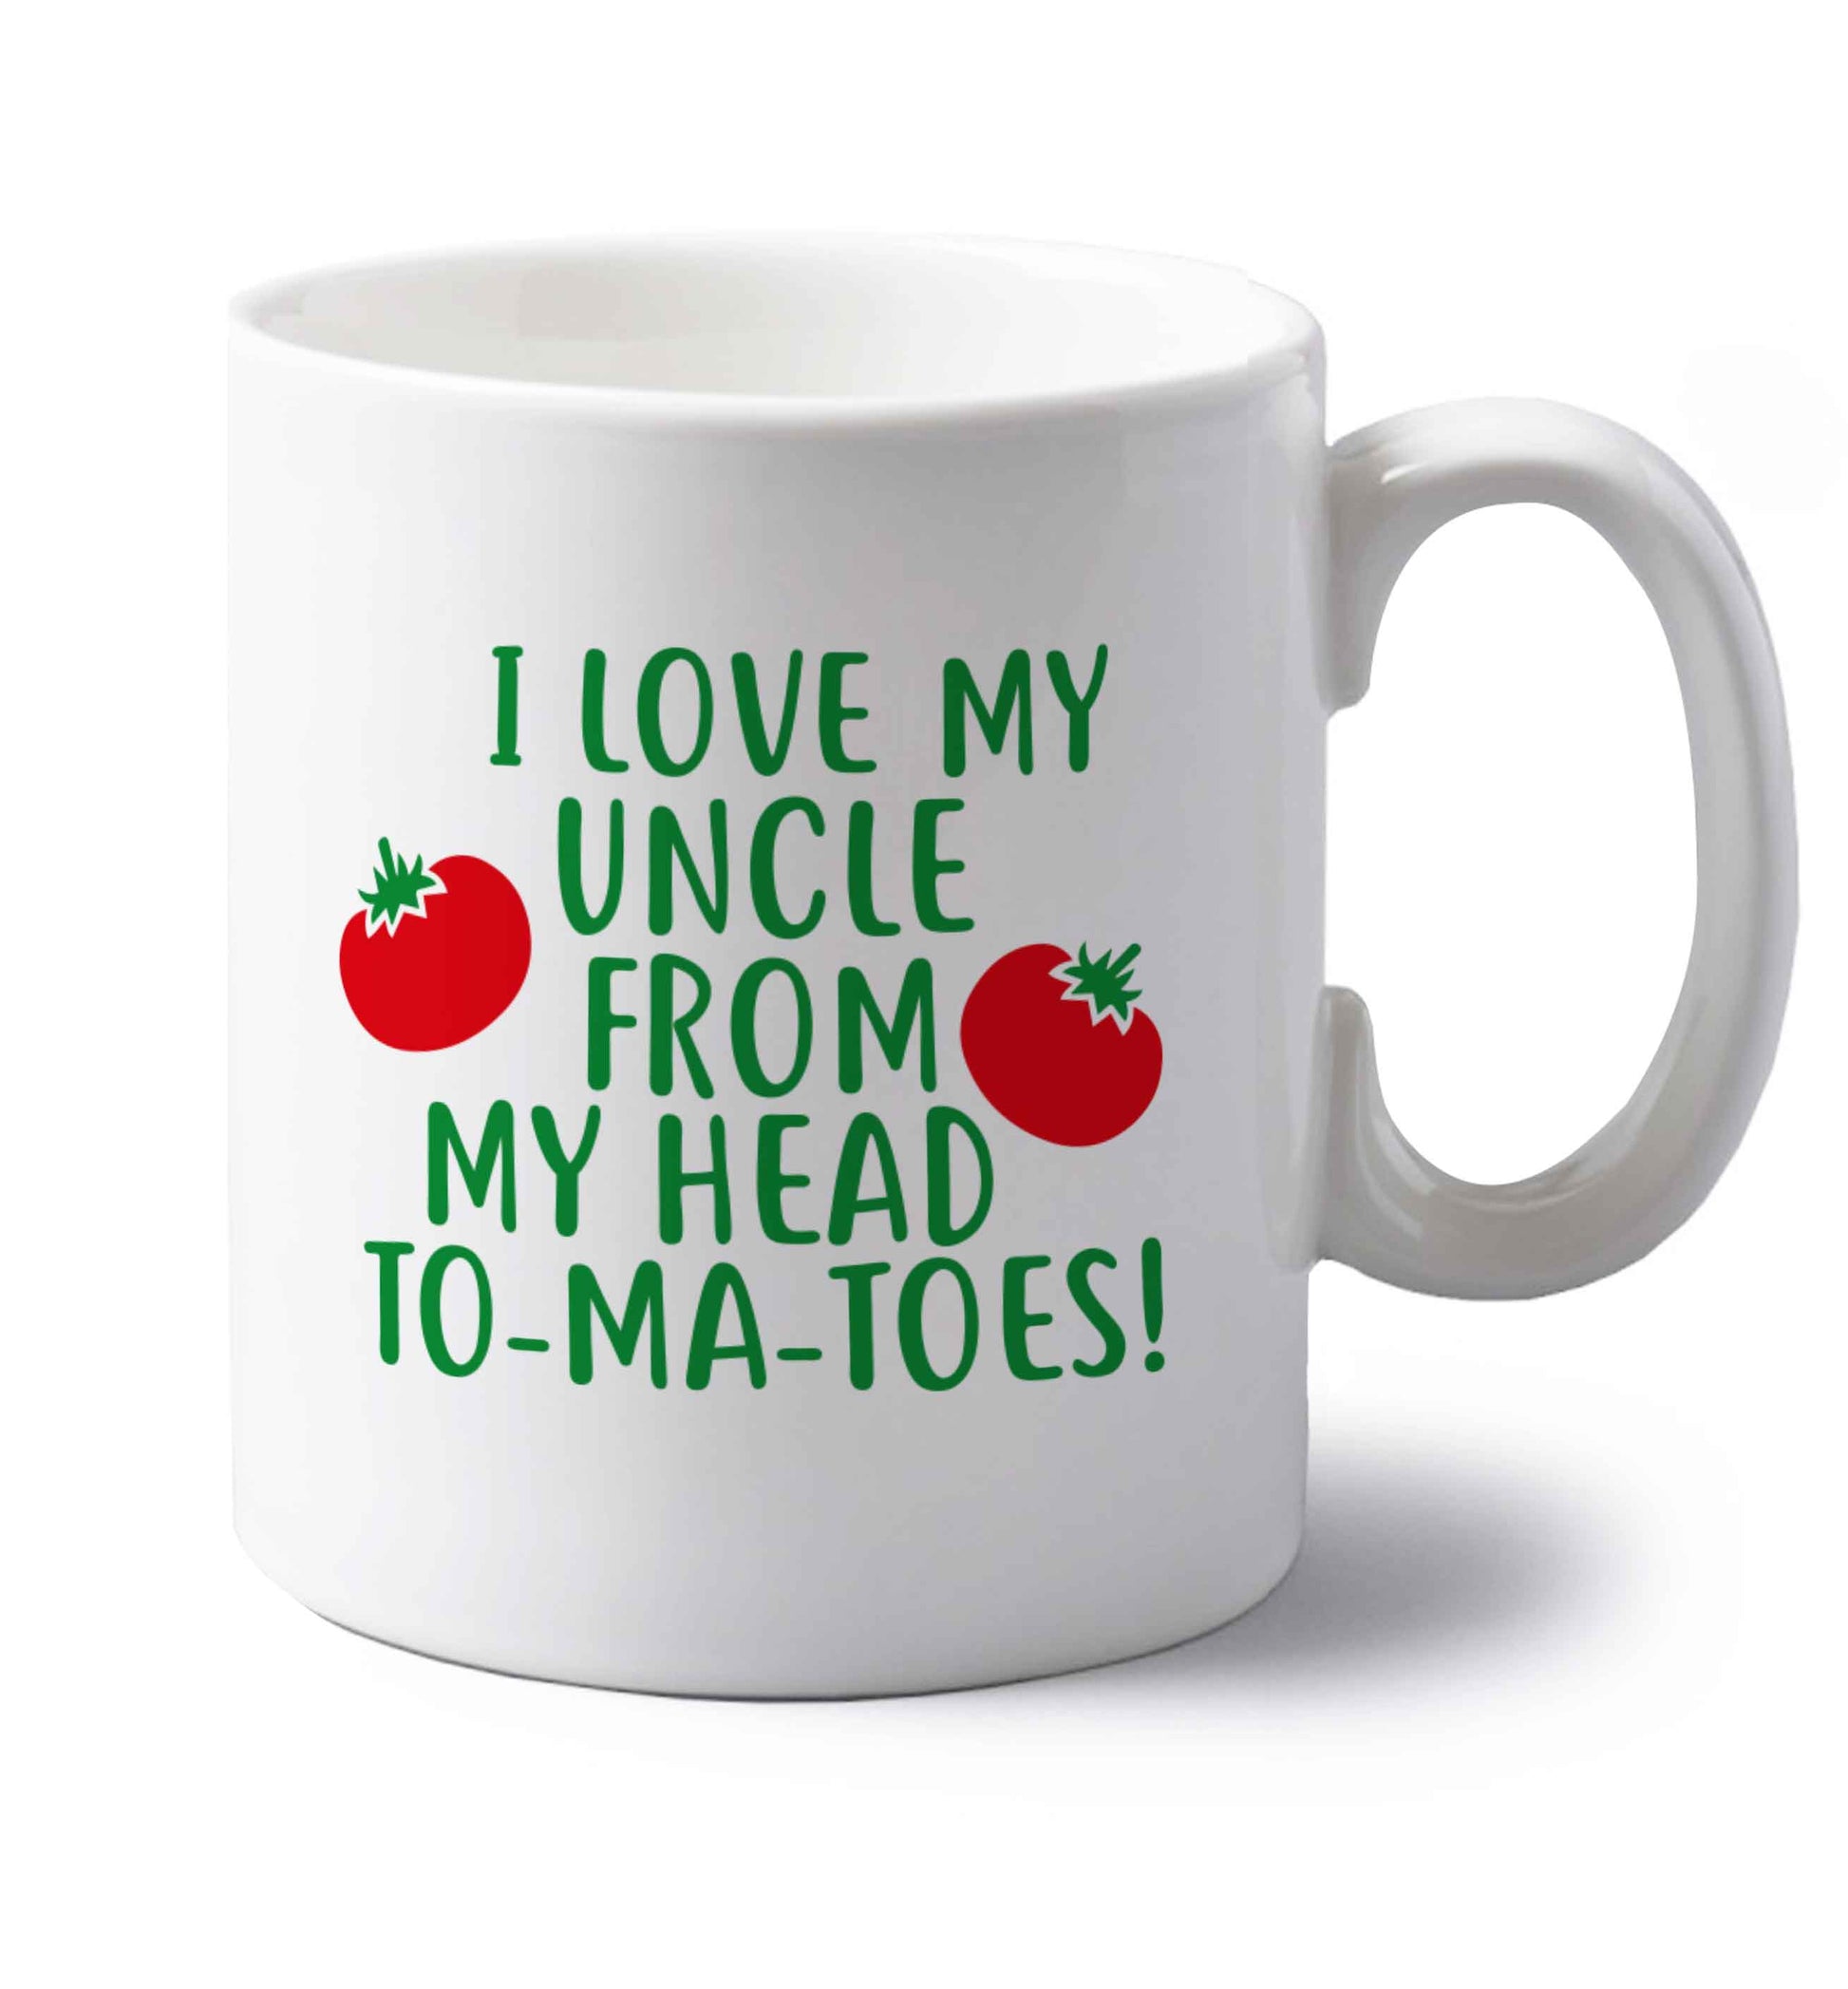 I love my uncle from my head To-Ma-Toes left handed white ceramic mug 